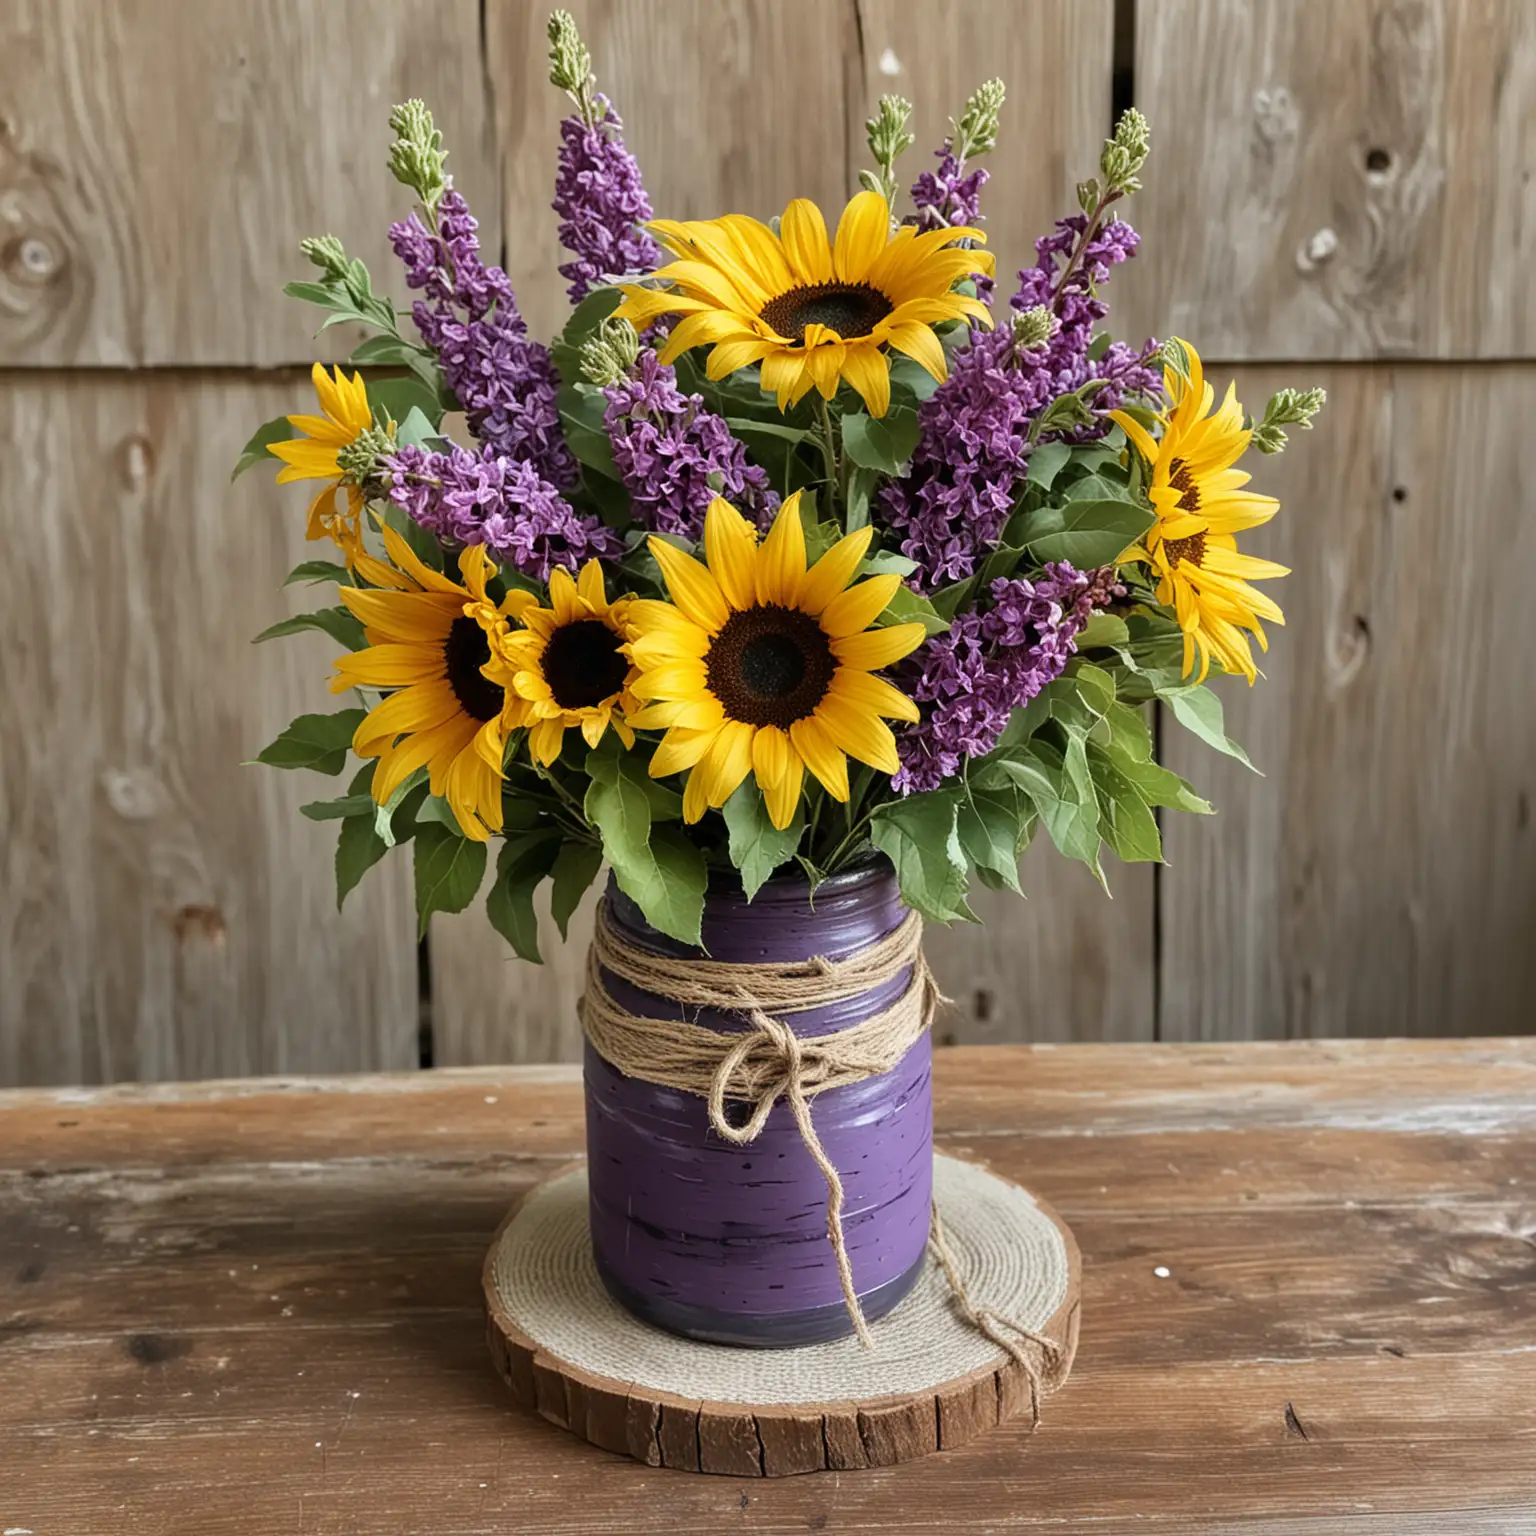 a simple and small worn, rustic centerpiece for a wedding with a rustic and work vase painted distressed purple with a few layers of twine tied around it and filled with sunflowers and lilacs